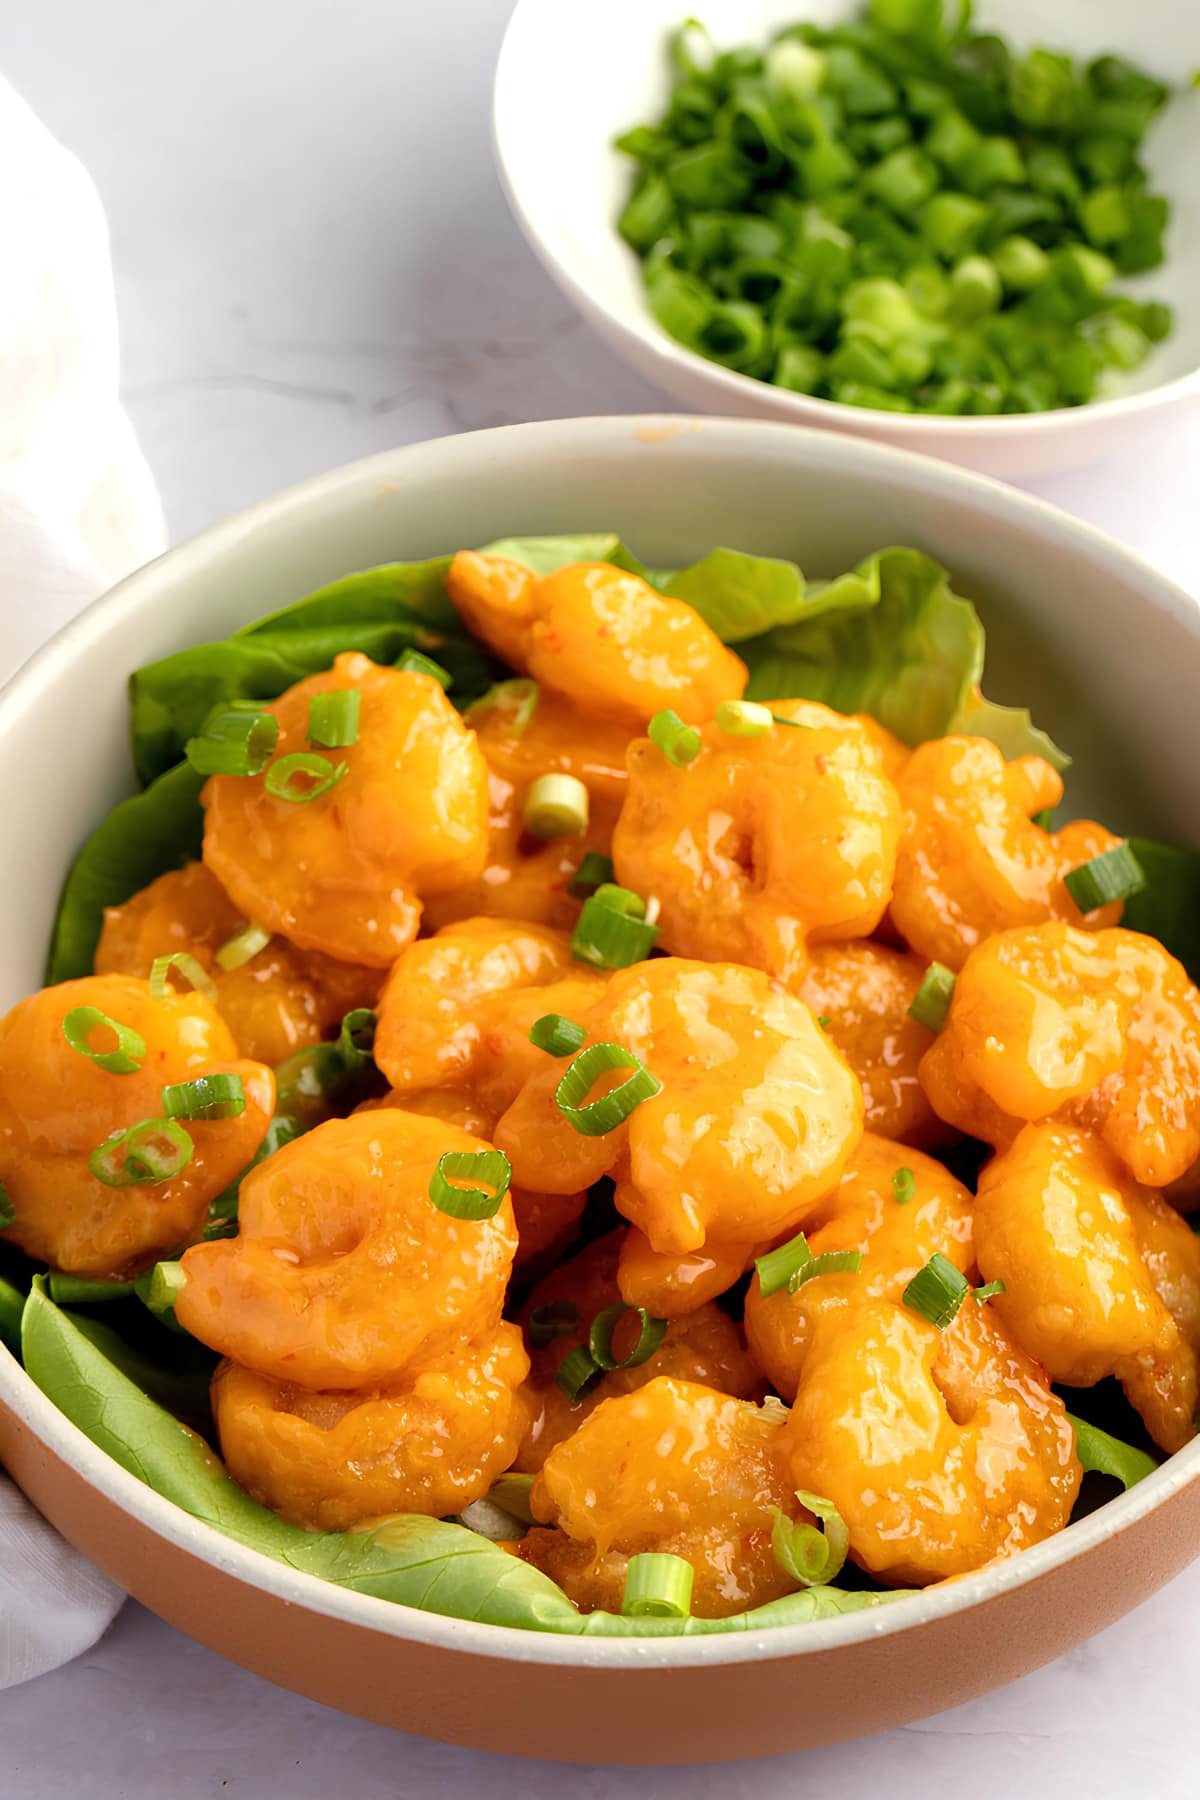 Bang Bang Shrimp with Green Onions and Lettuce in a Bowl